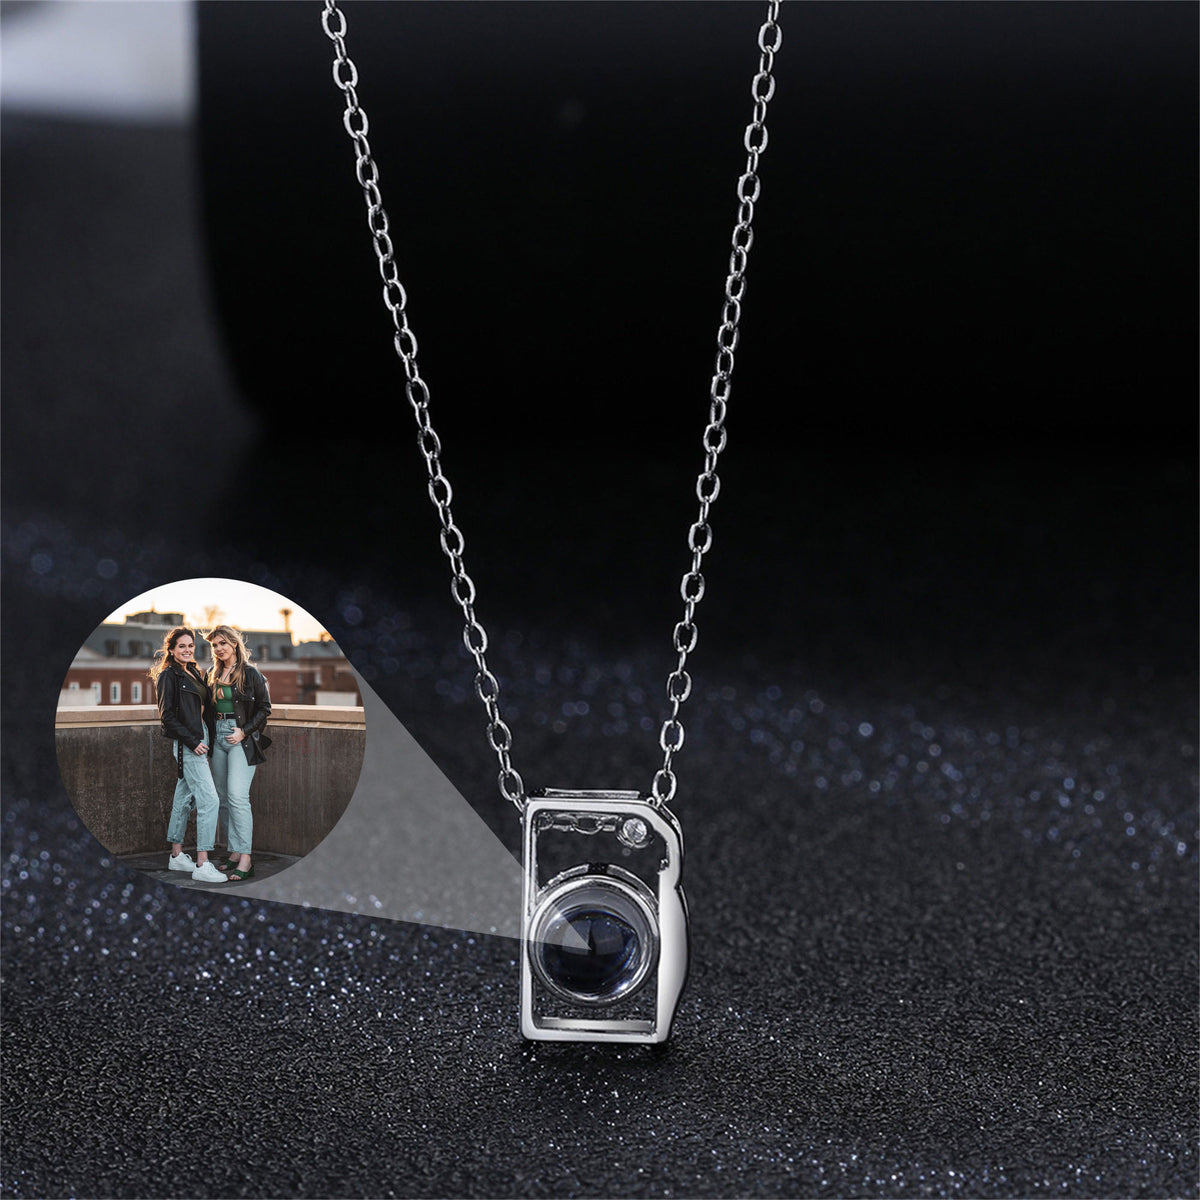 Custom Camera Projection Necklace, Personalized Memorial Photo Pendant Necklace